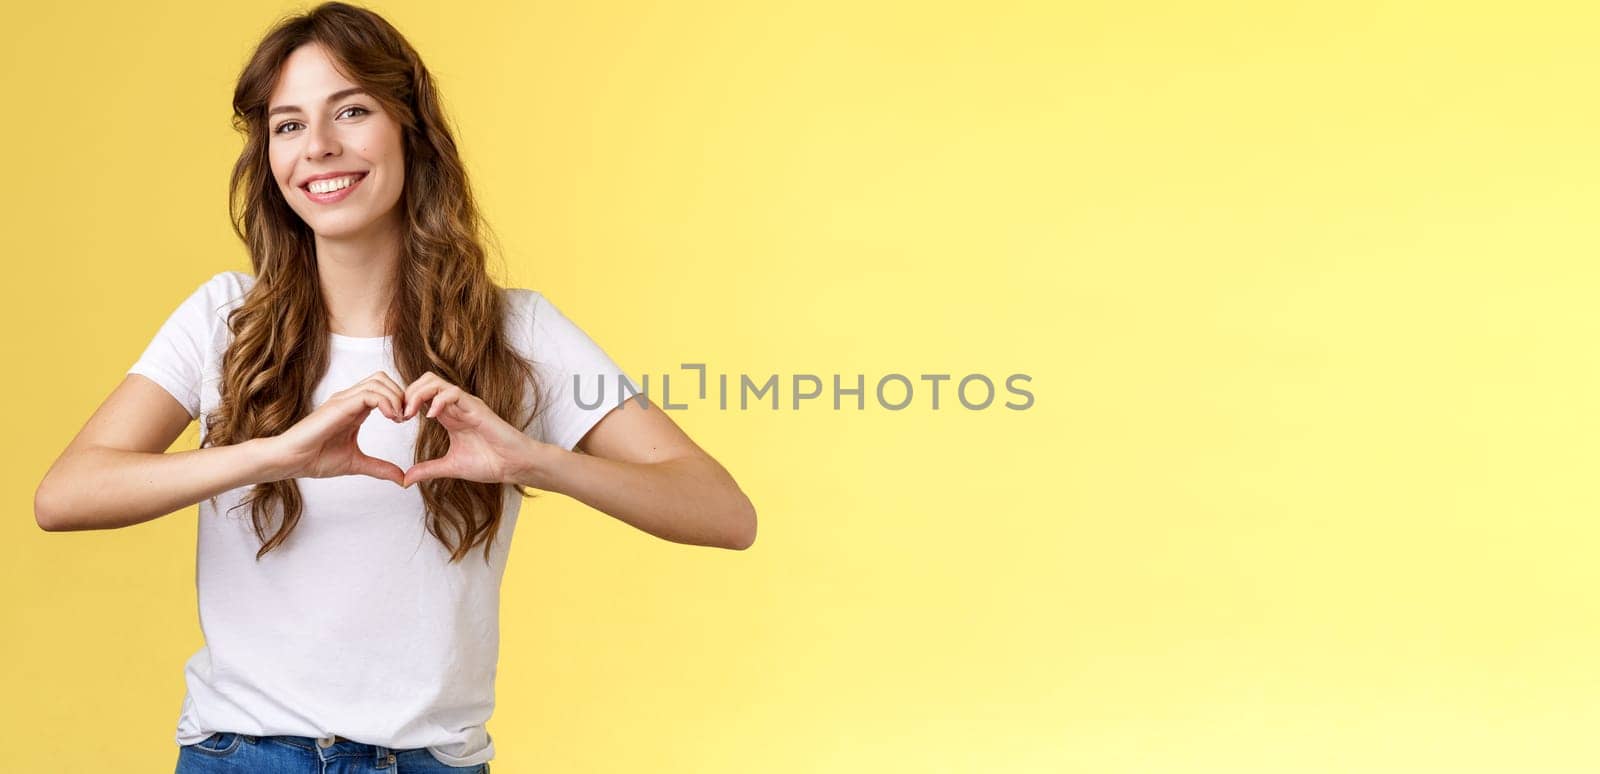 Carefree tender attractive woman curly long hairstyle show heart sign near chest express love like summer memories smiling broadly tilt head joyfully confess romantic feelings cherish friendship. Lifestyle.